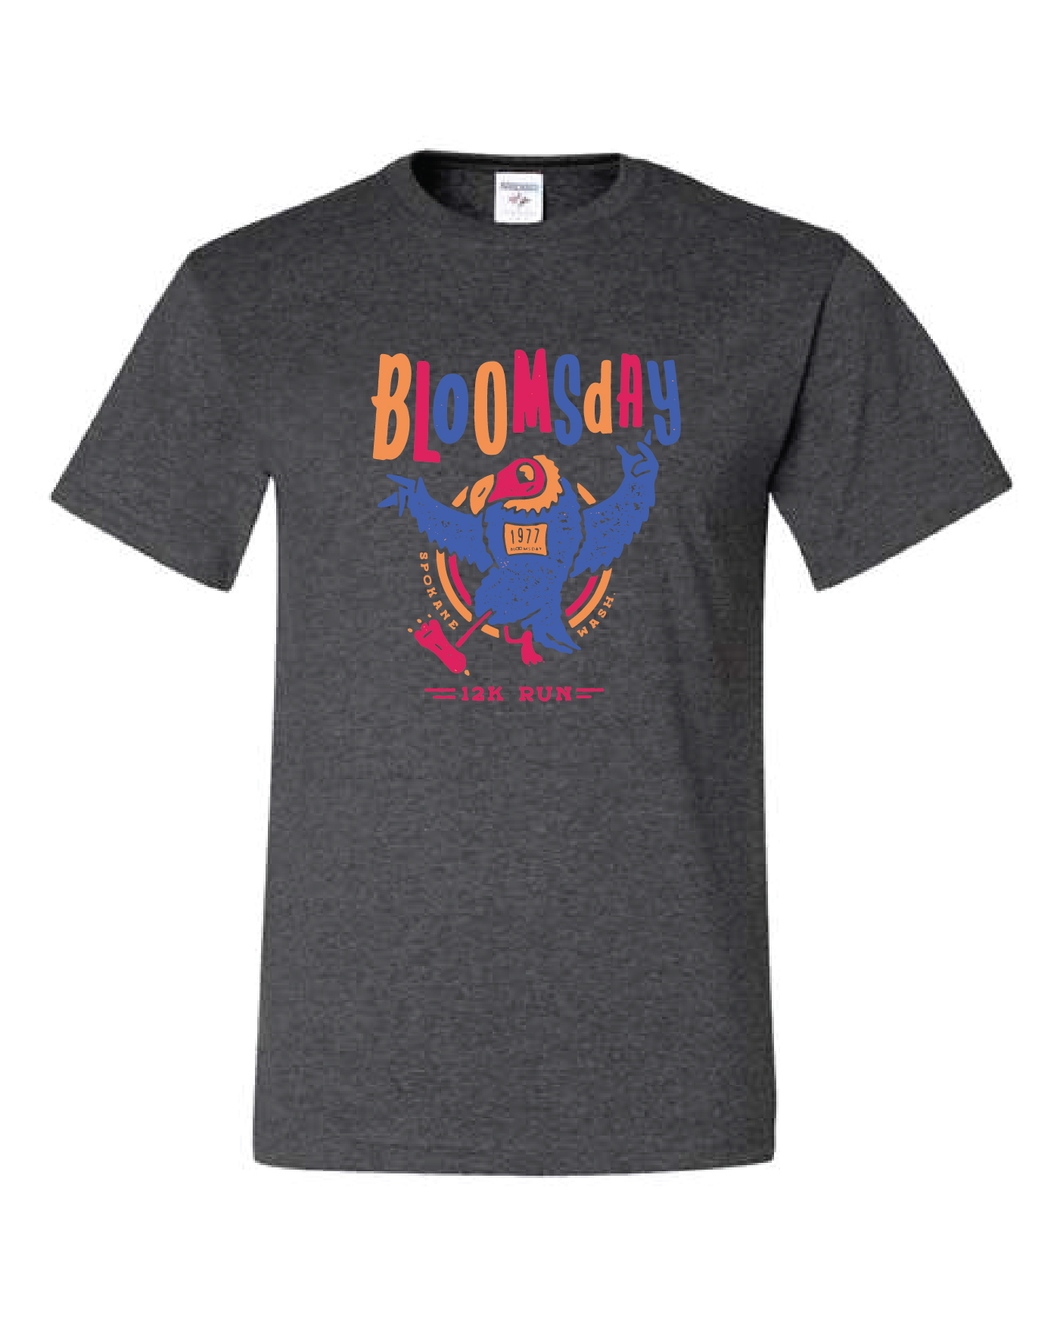 Bloomsday Vulture Shirt (Bright)